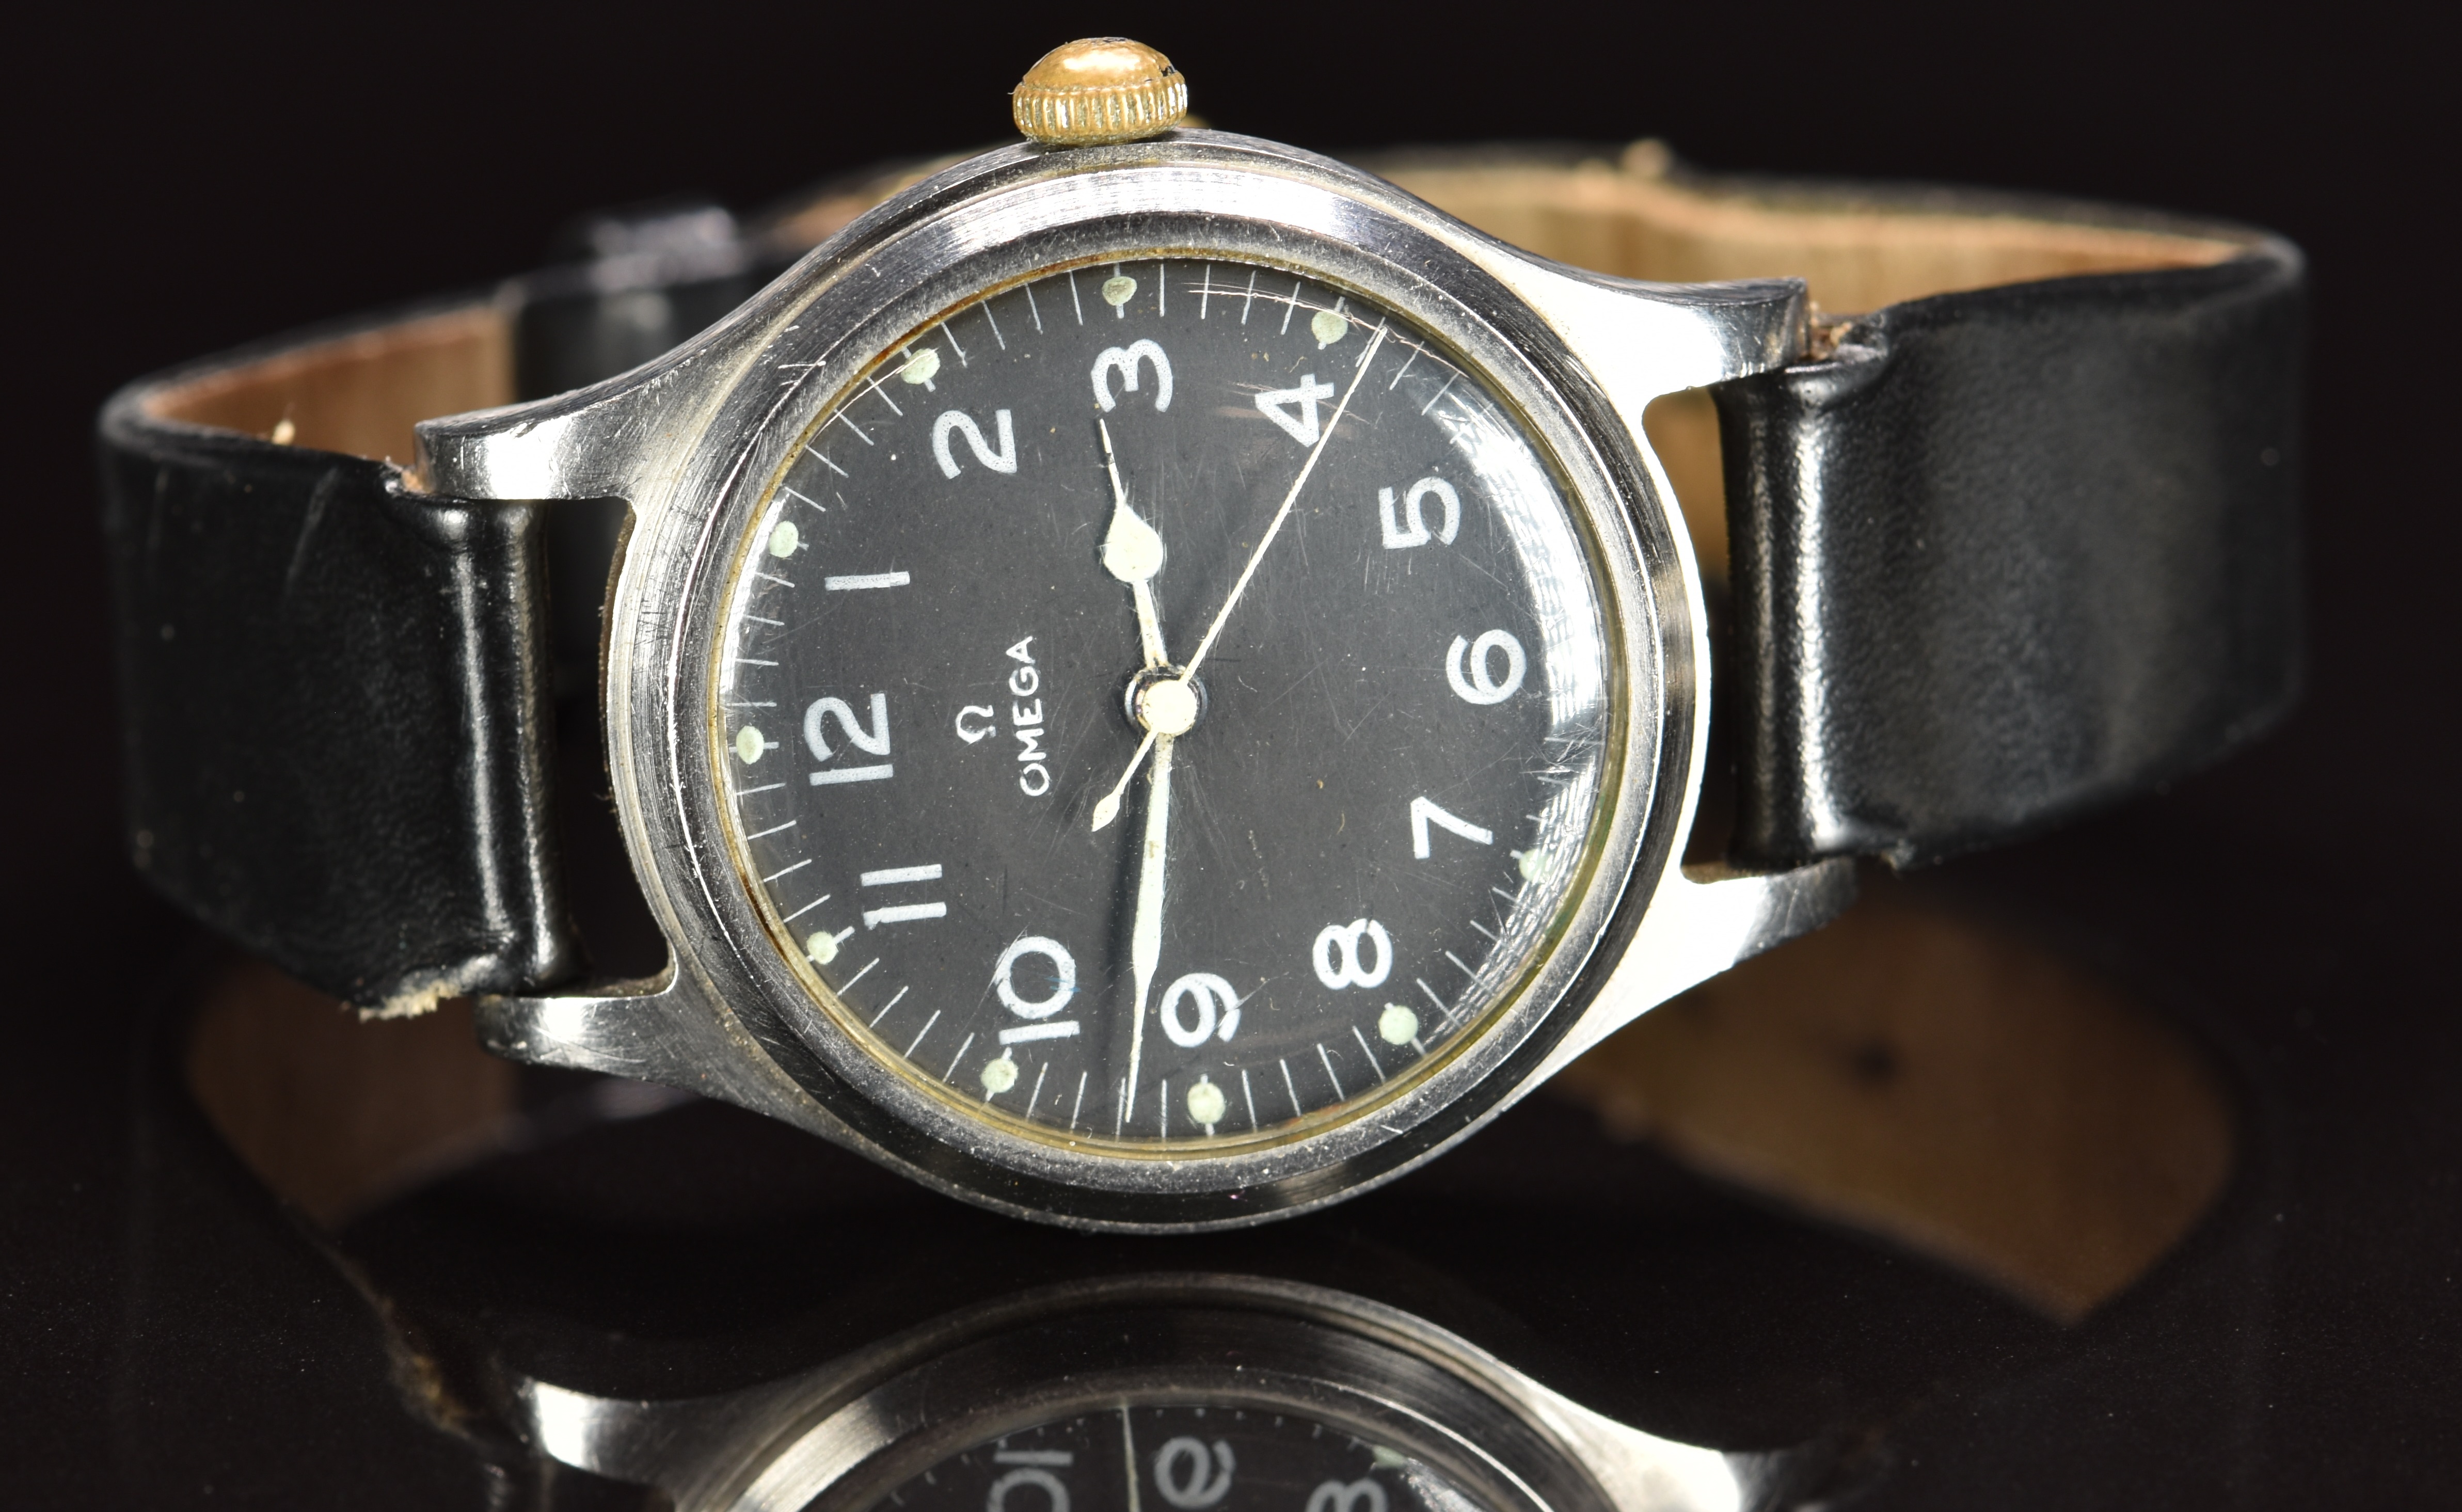 Omega British military issue wristwatch with luminous hands, white Arabic numerals, black dial, - Image 4 of 6